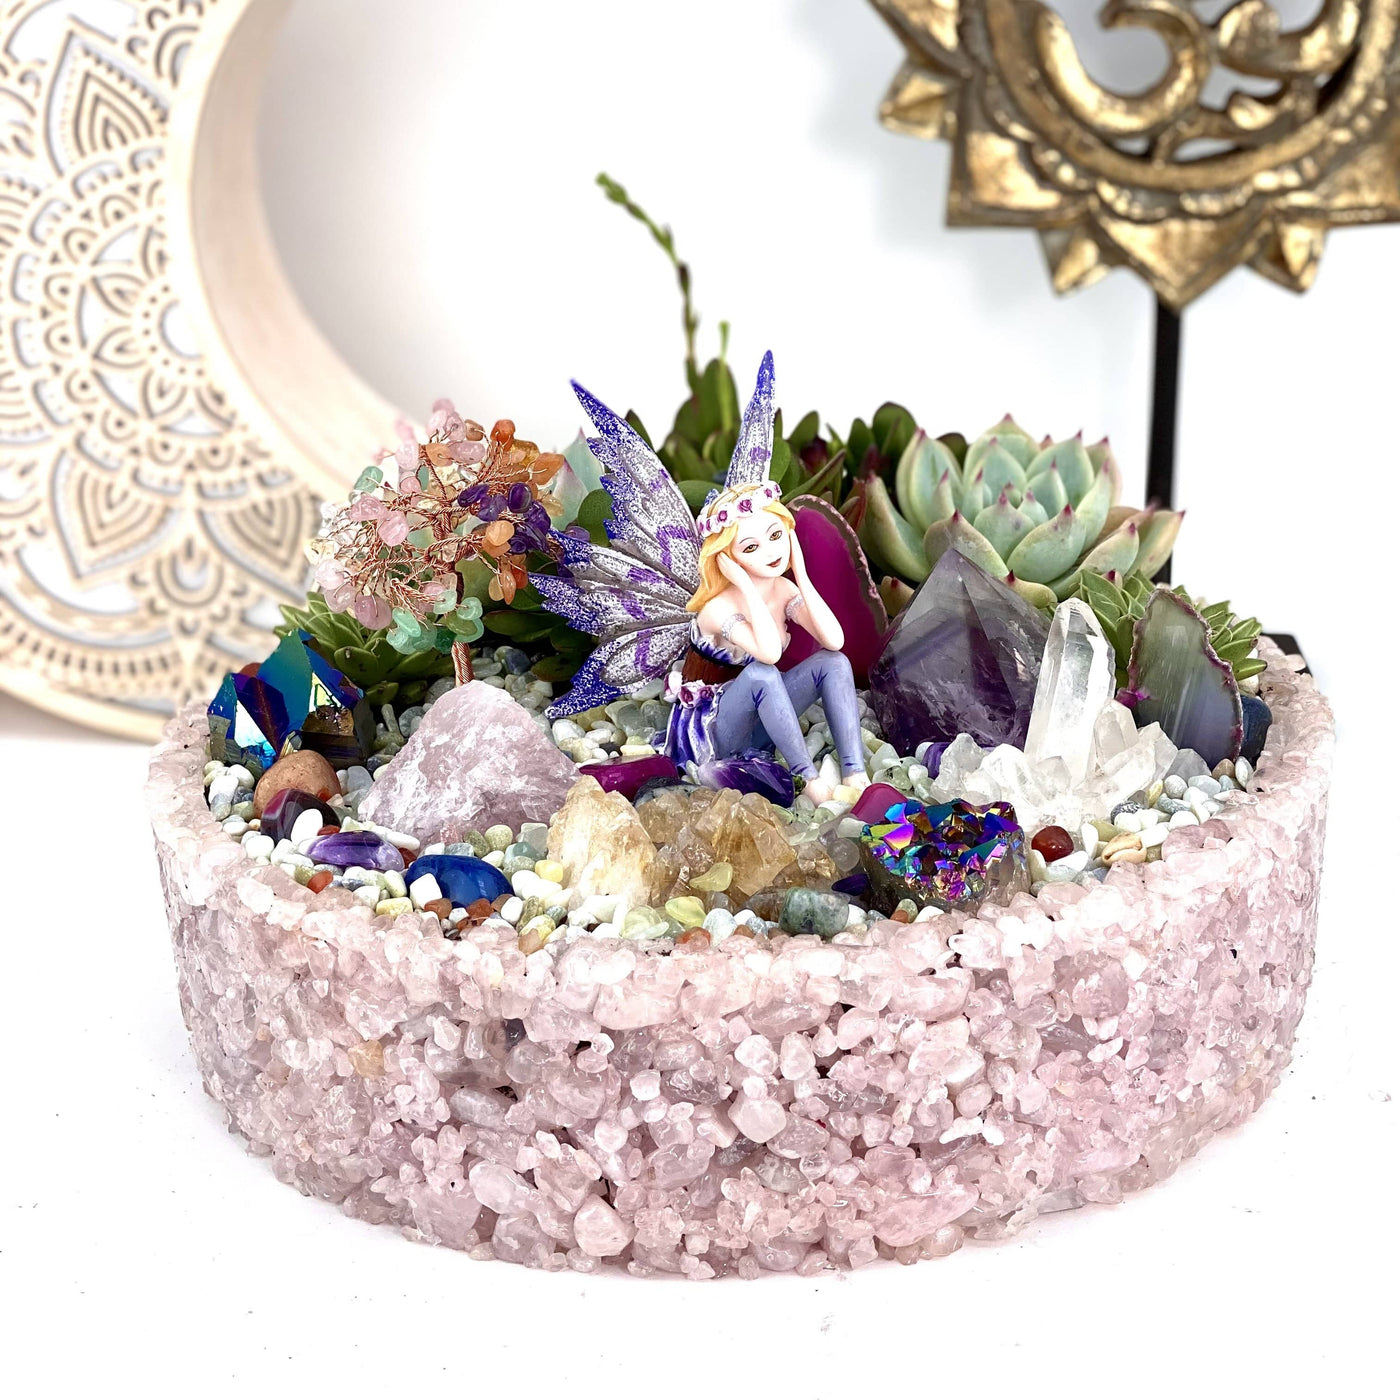 Tumbled Stone Bowl  - with a fairy garden in it